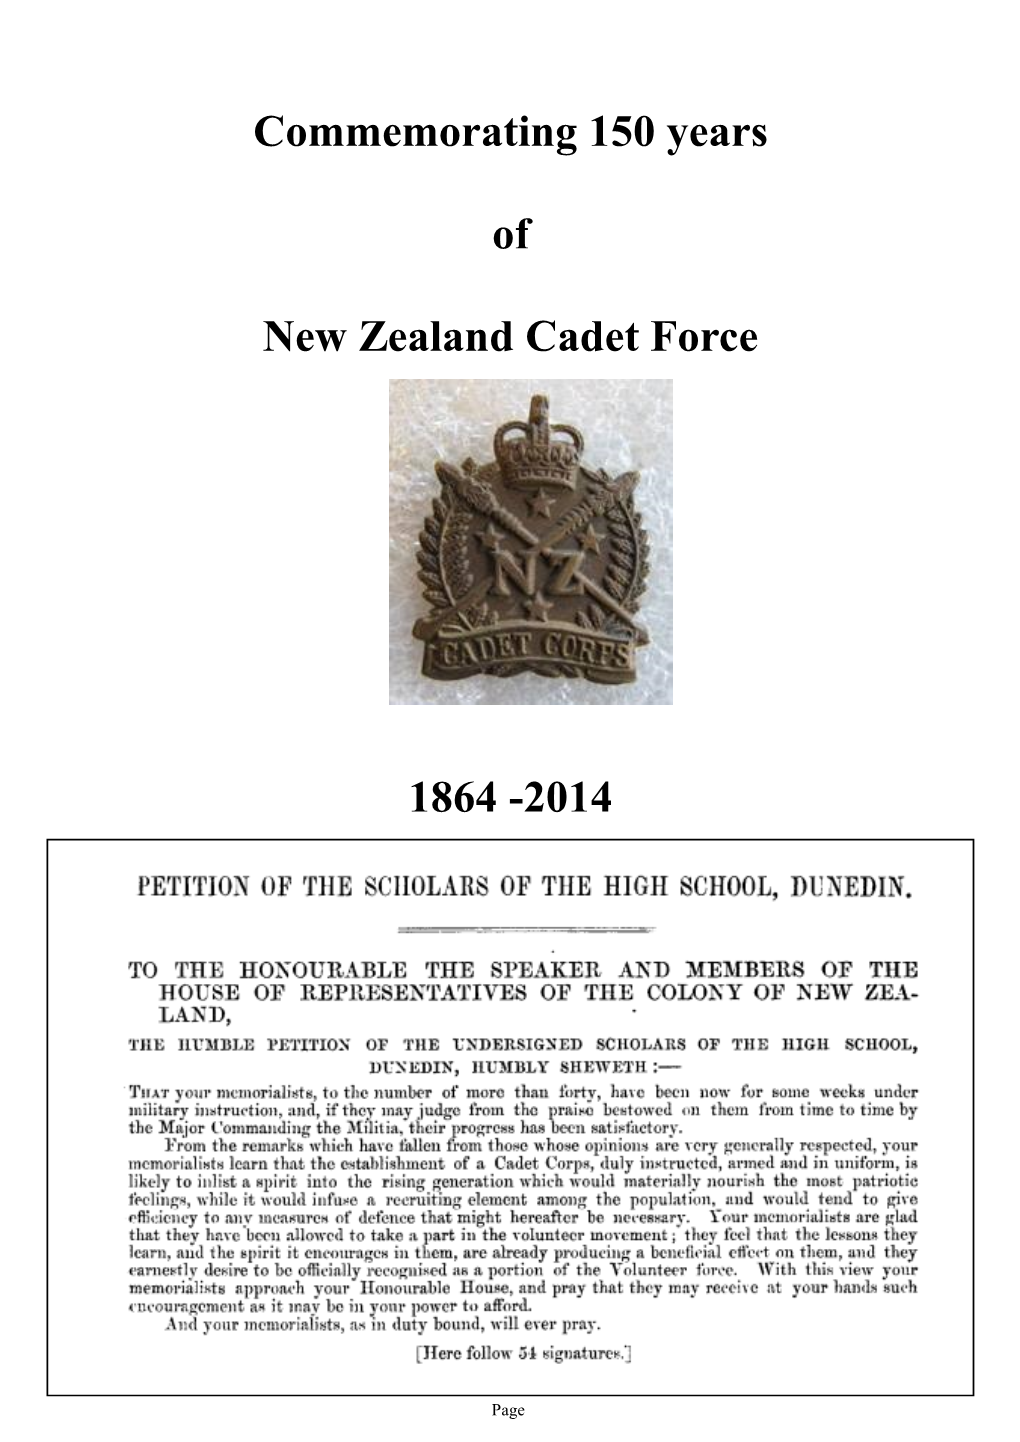 Commemorating 150 Years of New Zealand Cadet